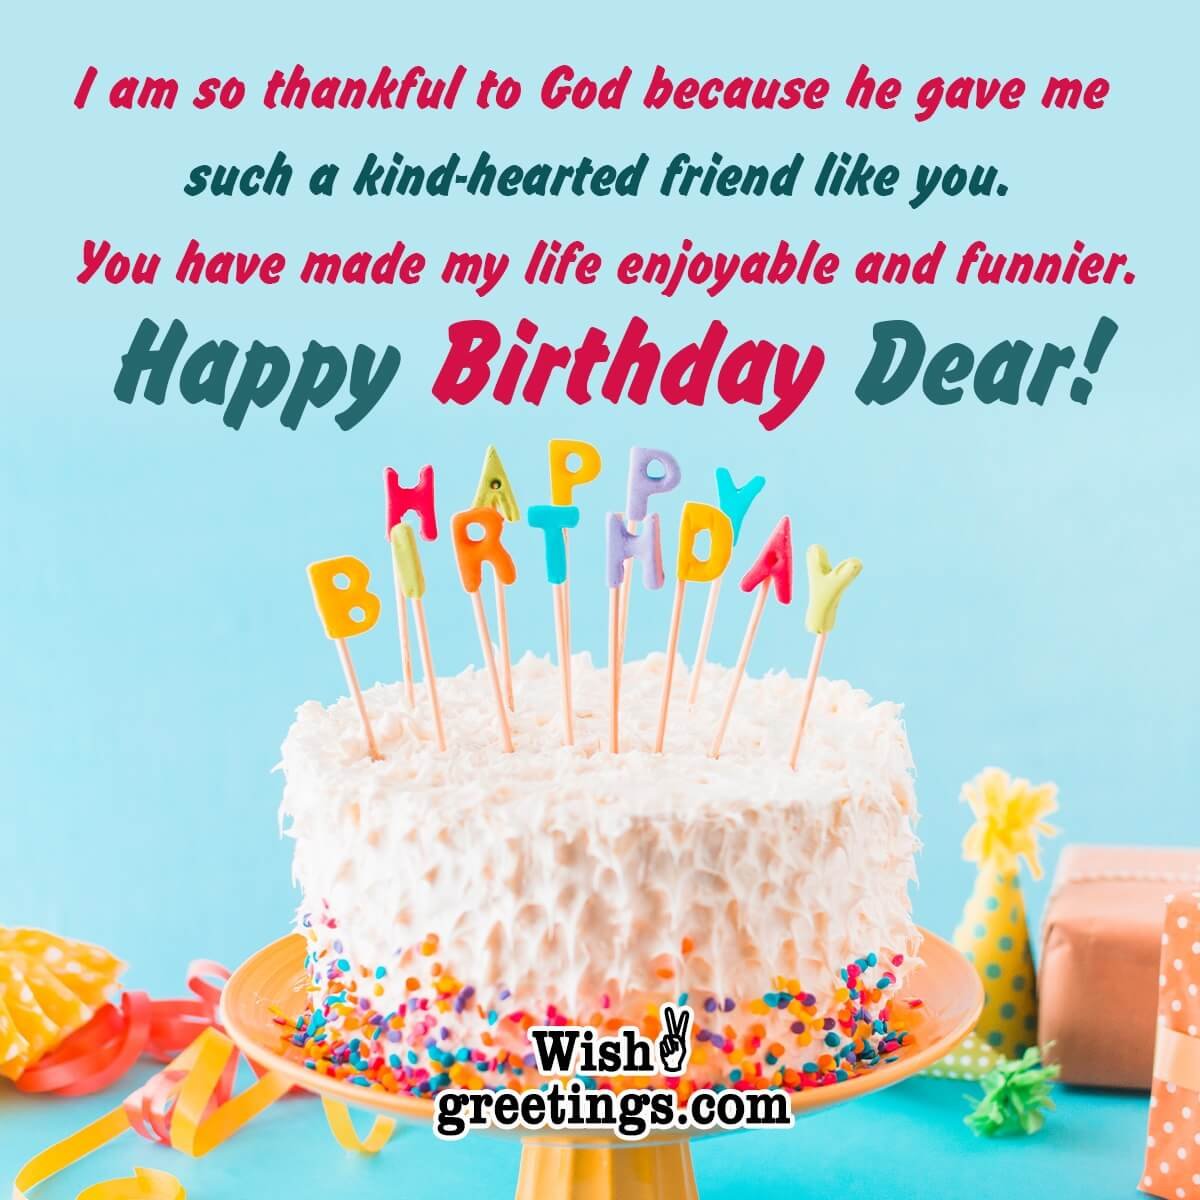 Best Happy Birthday Messages for Friends - Wish Greetings